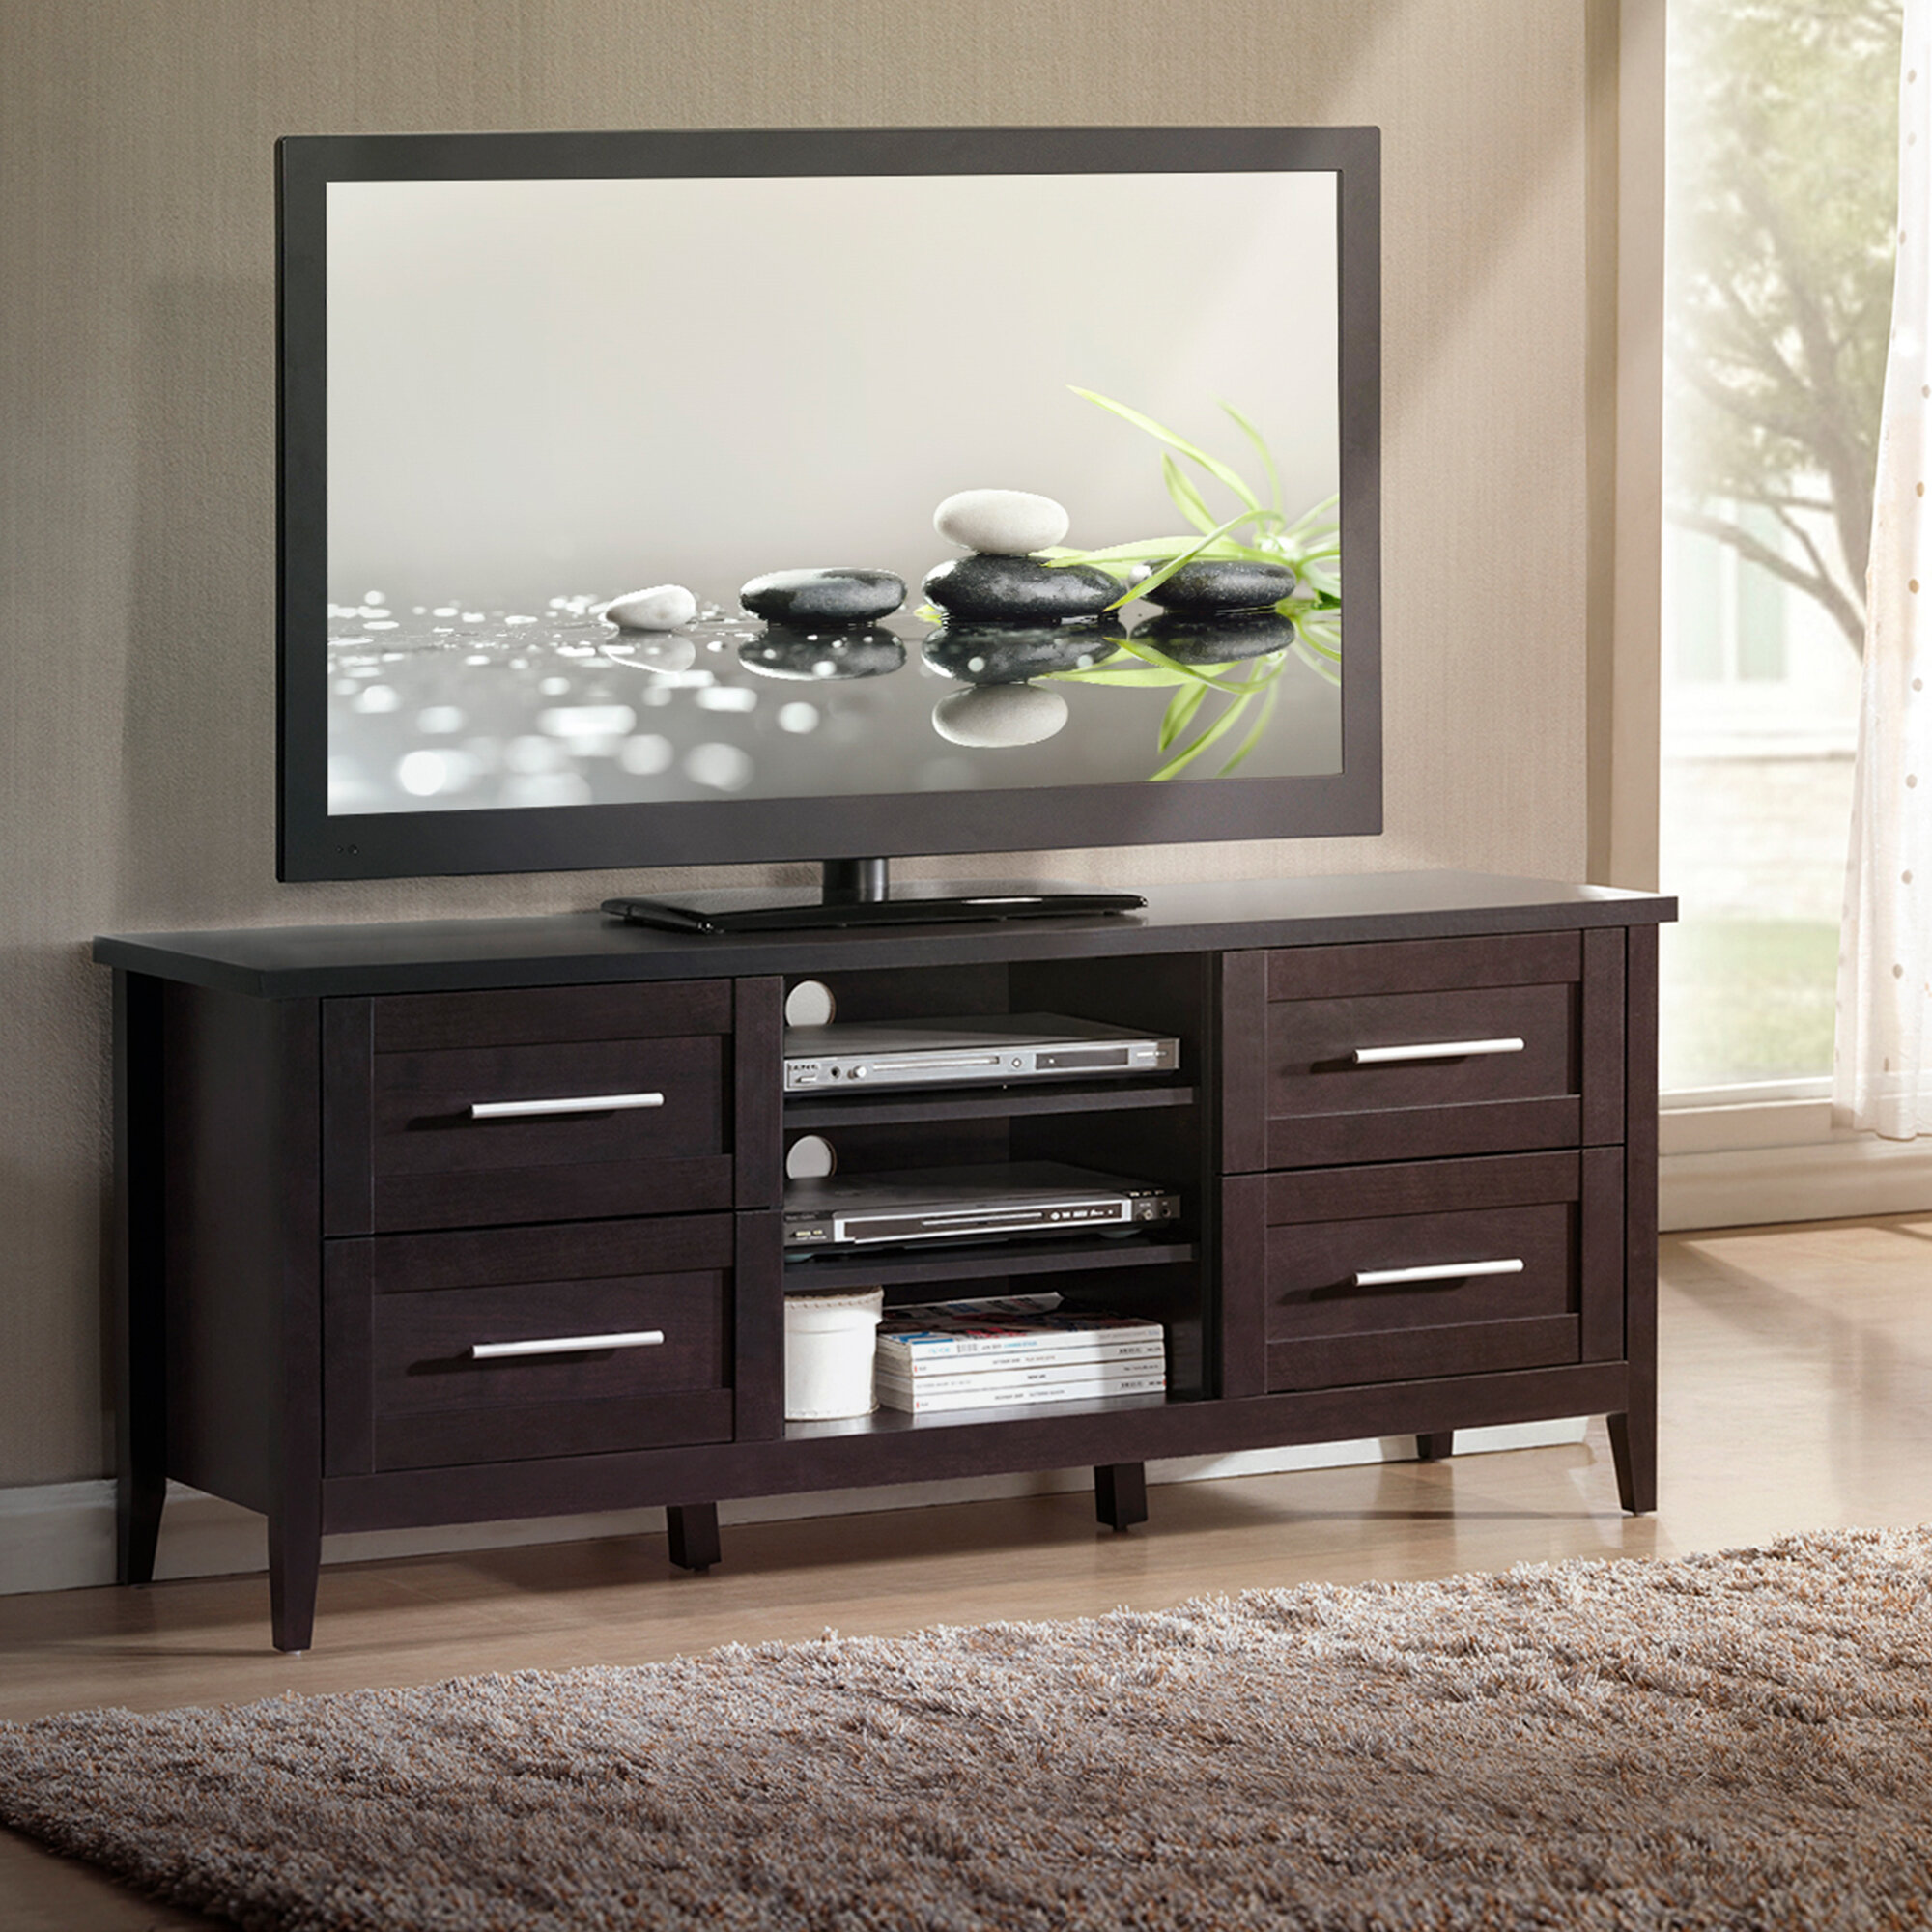 Ebern Designs Bahama Tv Stand For Tvs Up To 65 Reviews Wayfair